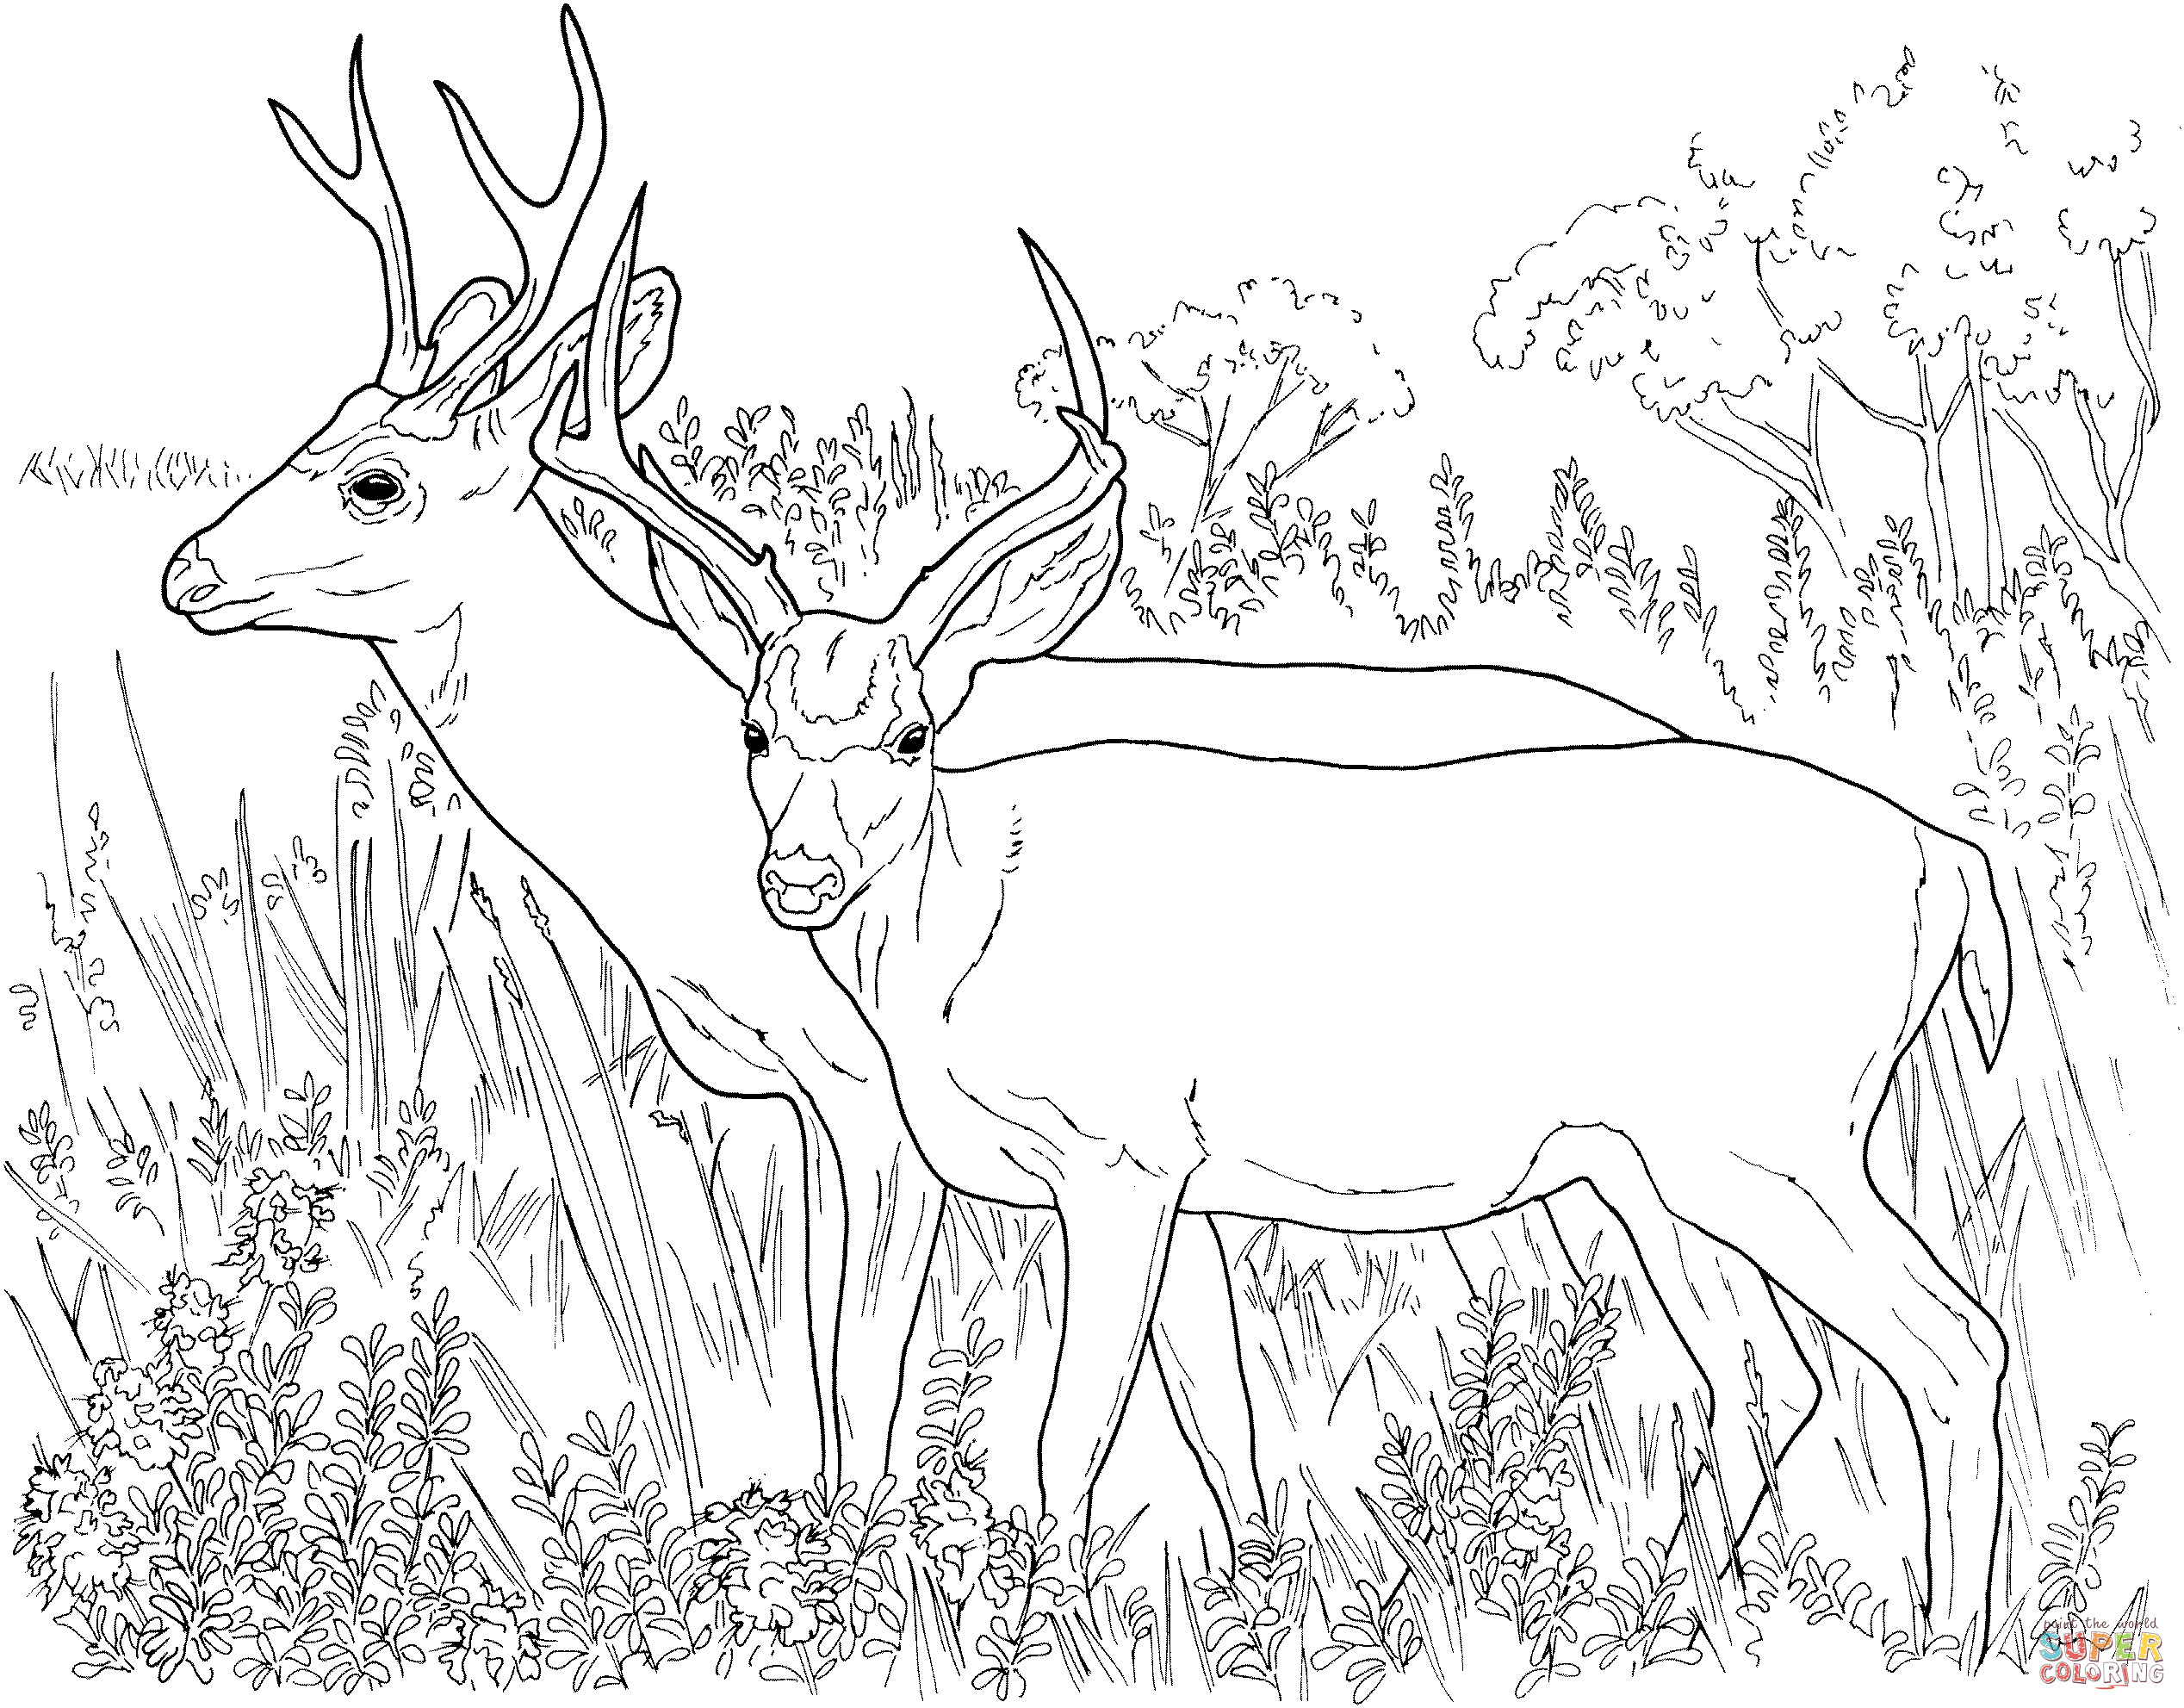 Deer Coloring Pages For Adults
 Two White Tailed Deers coloring page